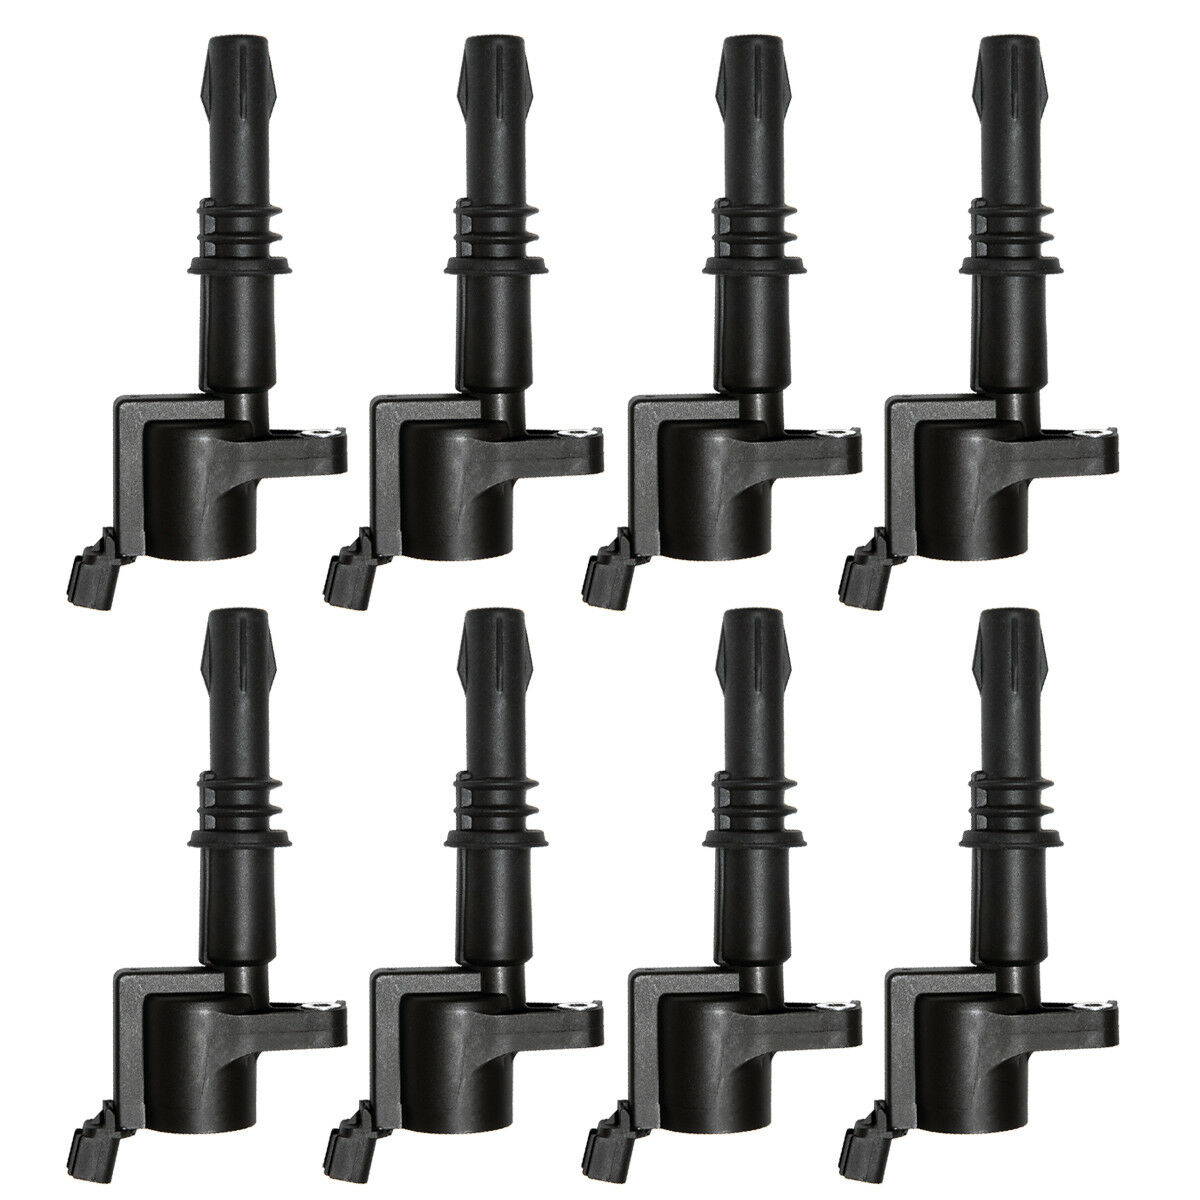 8 Pack Dg511 Ignition Coil For Ford Mustang F-150 Expedition 4.6l 5.4l 2004-2008